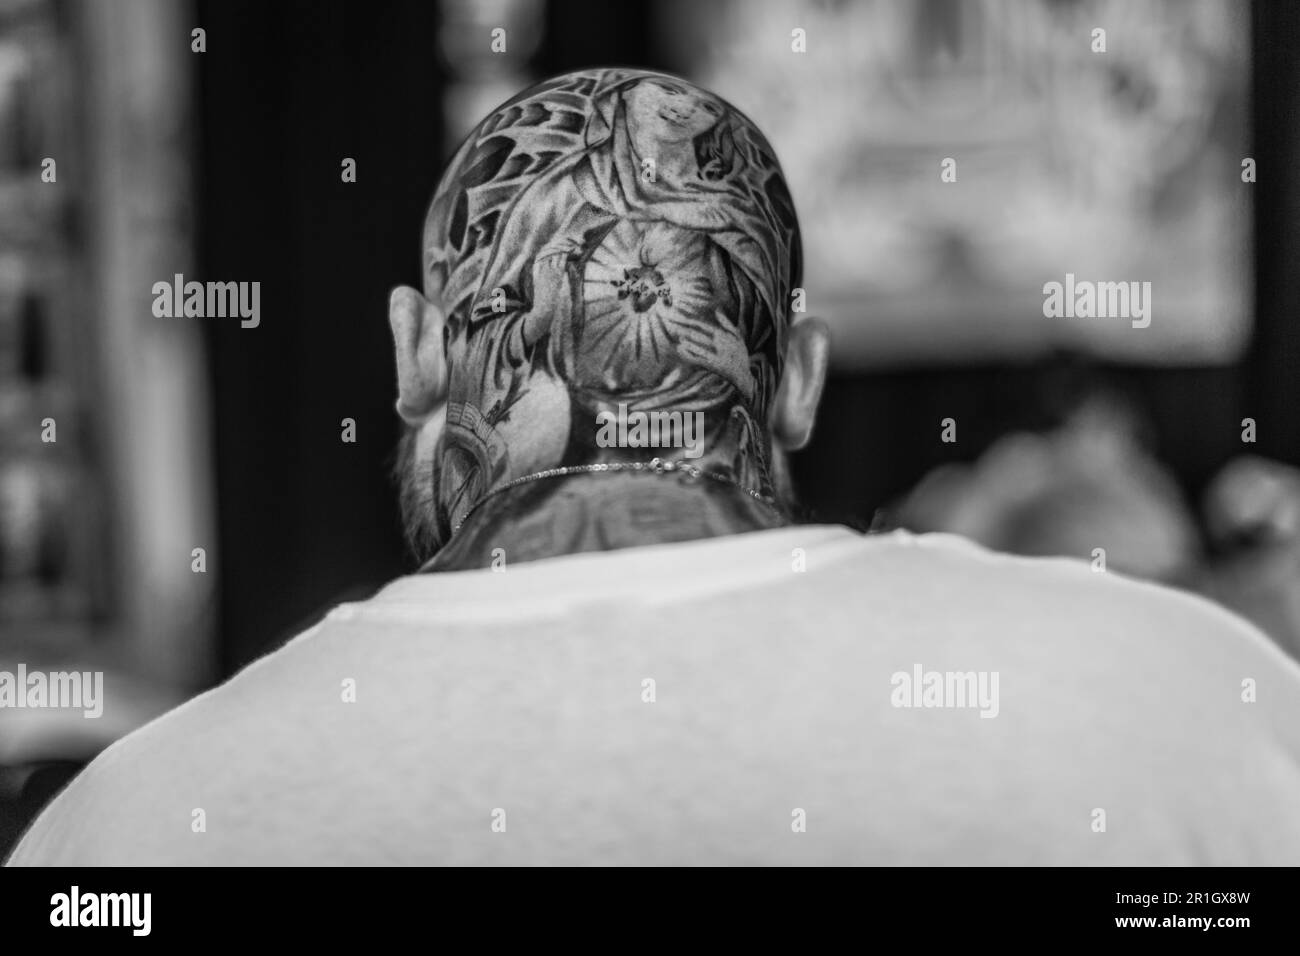 A black and white image of a rear view of a bald man with a tattoo on his skull. Stock Photo